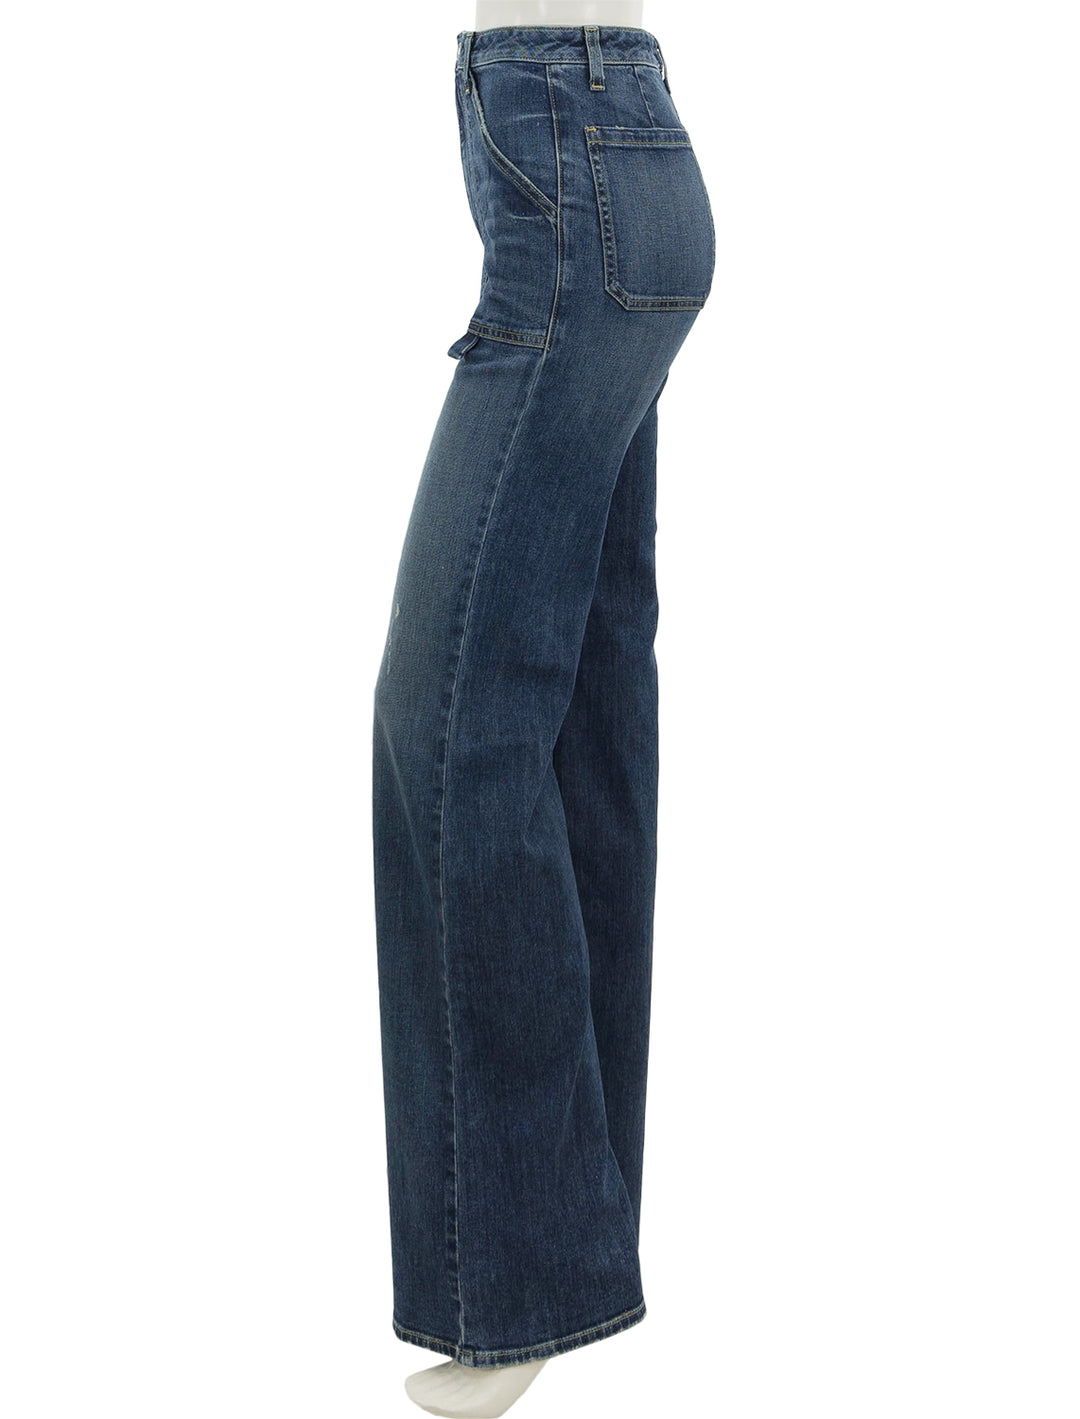 Side view of Nili Lotan's quentin jean in classic wash.